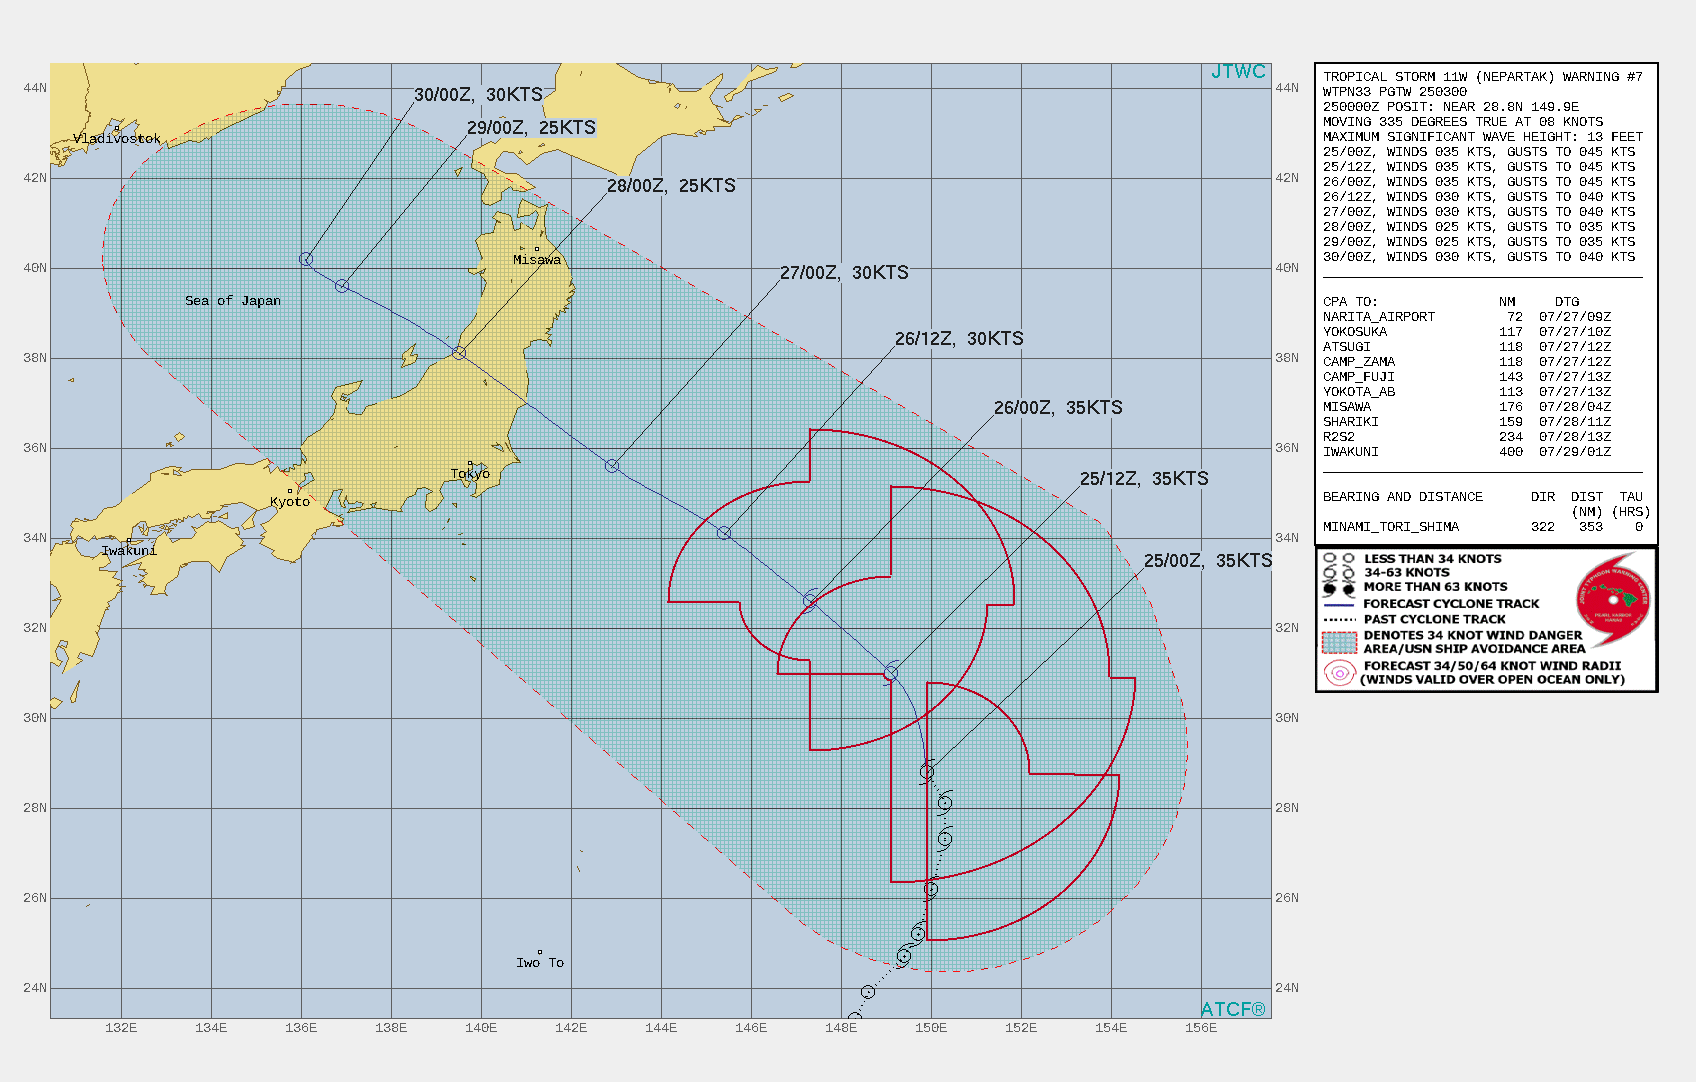 11W(NEPARTAK). WARNING 7 ISSUED AT 25/03UTC.THERE ARE NO SIGNIFICANT CHANGES TO THE FORECAST FROM THE PREVIOUS WARNING.  FORECAST DISCUSSION: SUBTROPICAL SYSTEM 11W WILL CONTINUE ON ITS CURRENT TRACK MORE NORHTWESTWARD UNDER THE SUBTROPICAL RIDGE. THE MARGINAL ENVIRONMENT WILL SUSTAIN THE CURRENT INTENSITY FOR UP TO 24HRS AS STRONG OUTFLOW AND WARM SSTS OFFSET THE STRONG VERTICAL WIND SHEAR(VWS). AFTERWARD, THE CYCLONE WILL WEAKEN TO TROPICAL DEPRESSION INTENSITY AND STRUGGLE TO MAINTAIN ITS CORE AS THE LARGE LOW LEVEL CIRCULATION BECOMES MORE IRREGULAR AND UNWIELDY UNDER VERY STRONG VWS. ADDITIONALLY, AN UPPER LEVEL LOW WILL STACK OVER THE SYSTEM AFTER 48H AND CAUSE SUBSIDENCE ALOFT AND STREAM COLD DRY AIR IN THE LOWER LEVELS. SHOULD 11W MAINTAIN ITS CORE, IT WILL MAKE LANDFALL OVER HONSHU NEAR 60H IN THE VICINITY OF IWAKI AND CROSS INTO THE SEA OF JAPAN (SOJ) SHORTLY AFTER 72H. THE UNUSUALLY WARM SOJ MAY REVIVE IT 30KNOTS. THERE IS NOW A DISTINCT POSSIBILITY THAT THE SYSTEM WILL DISSIPATE IN THE NEAR TERM UNDER THE INTENSE VWS AND THE ANTICIPATED NEGATIVE EFFECTS OF THE UPPER LEVEL LOW.